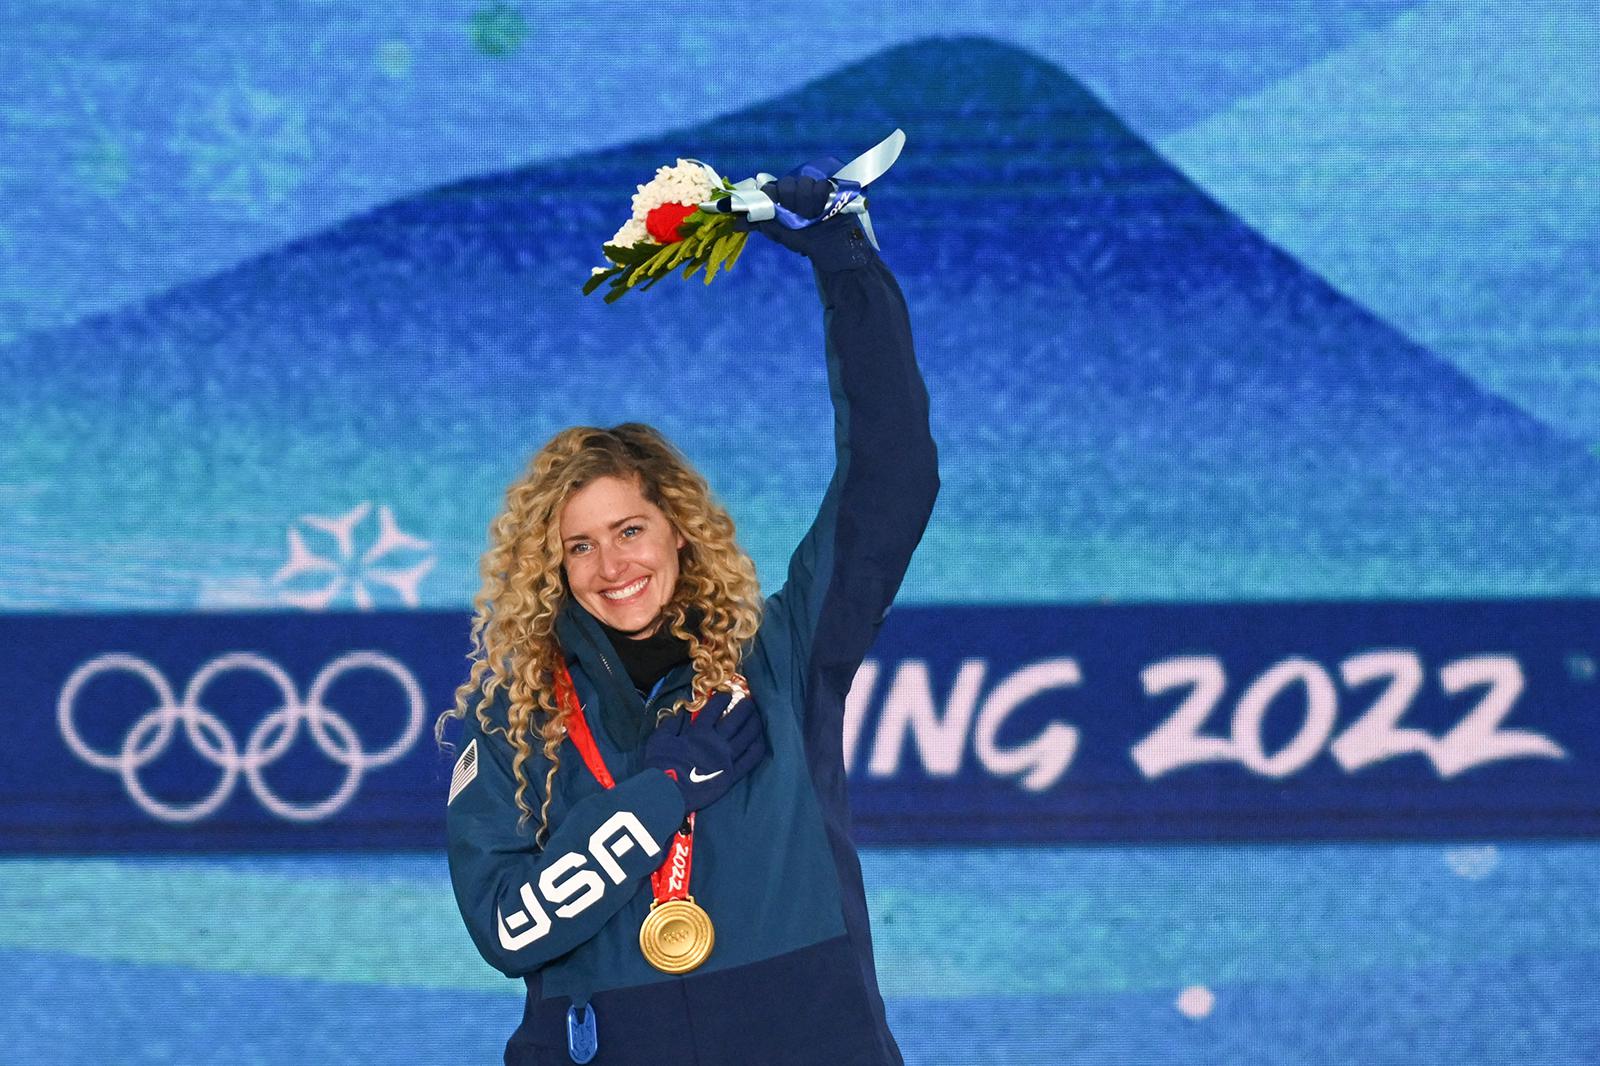 Finishing touch: 16 years later, snowboarder Lindsey Jacobellis gets gold.